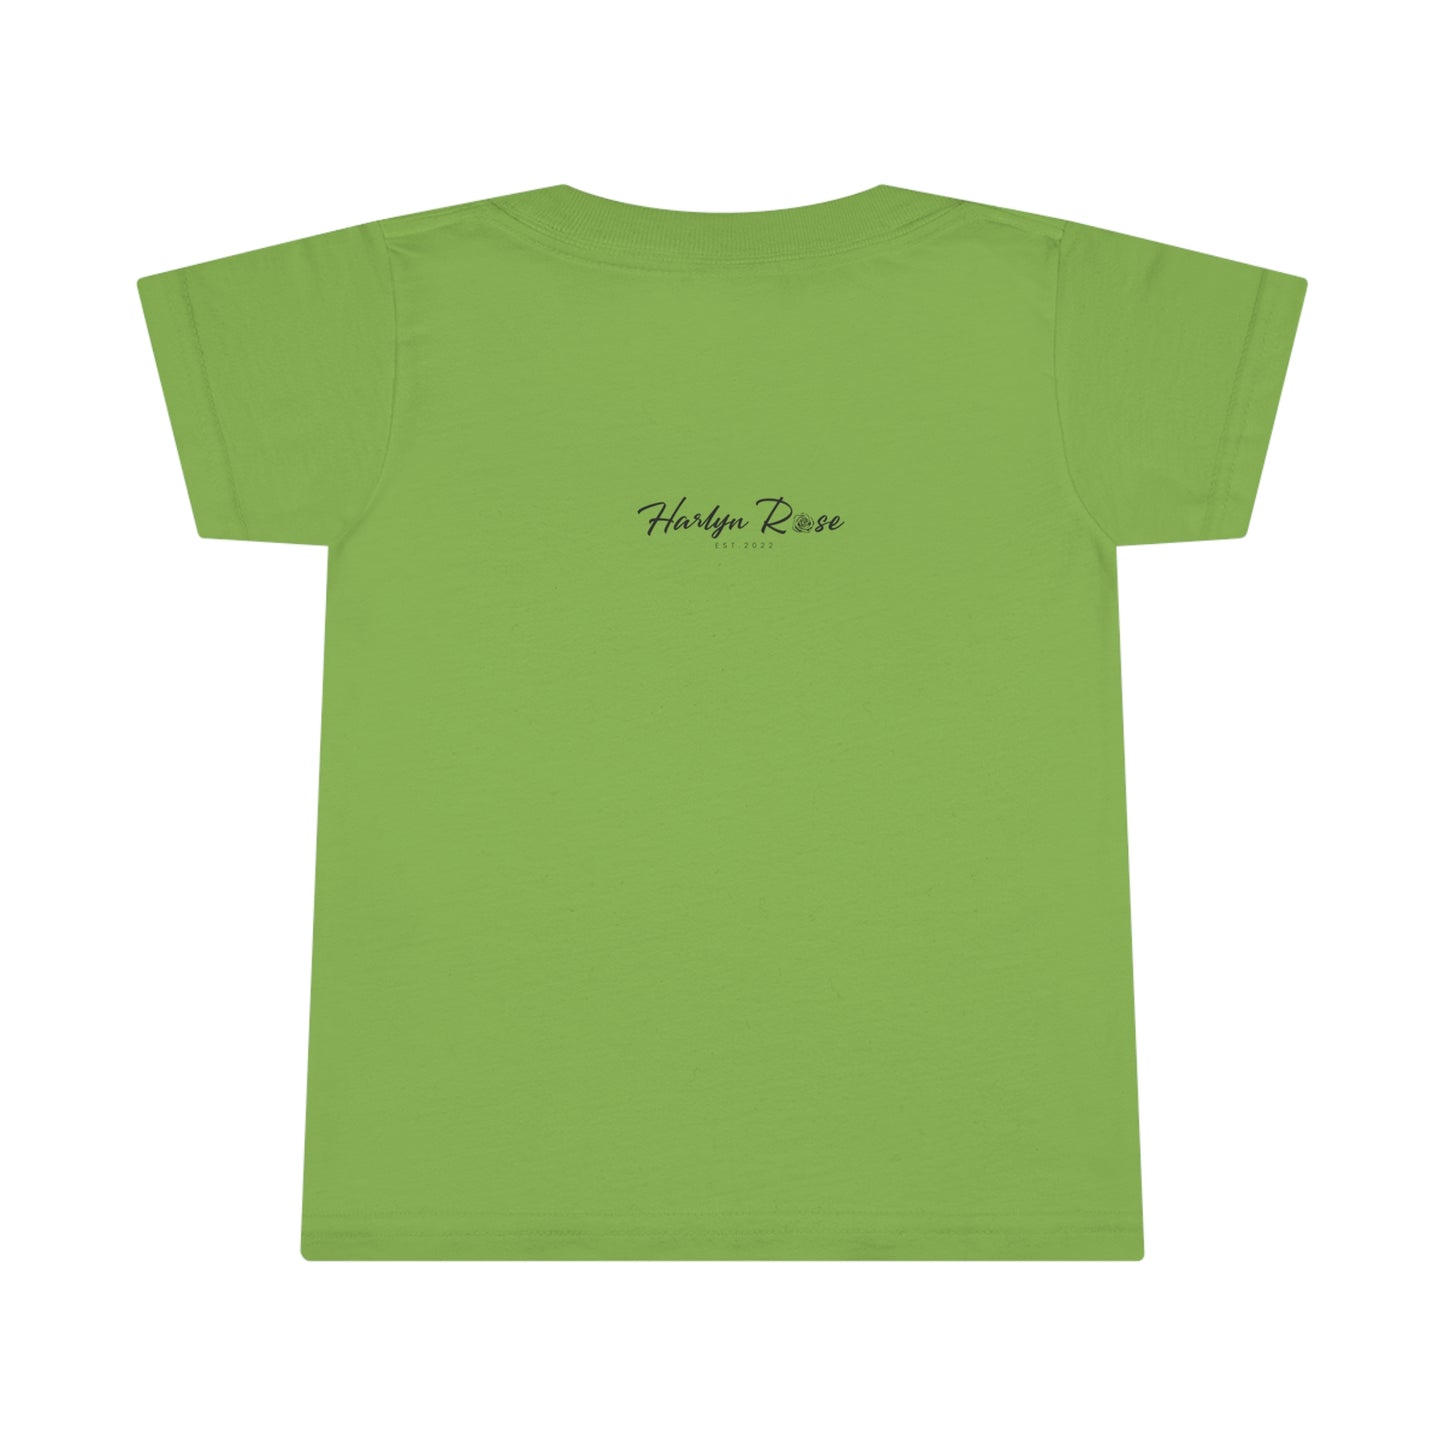 Toddler T-shirt - It's not the destination. It's the journey.